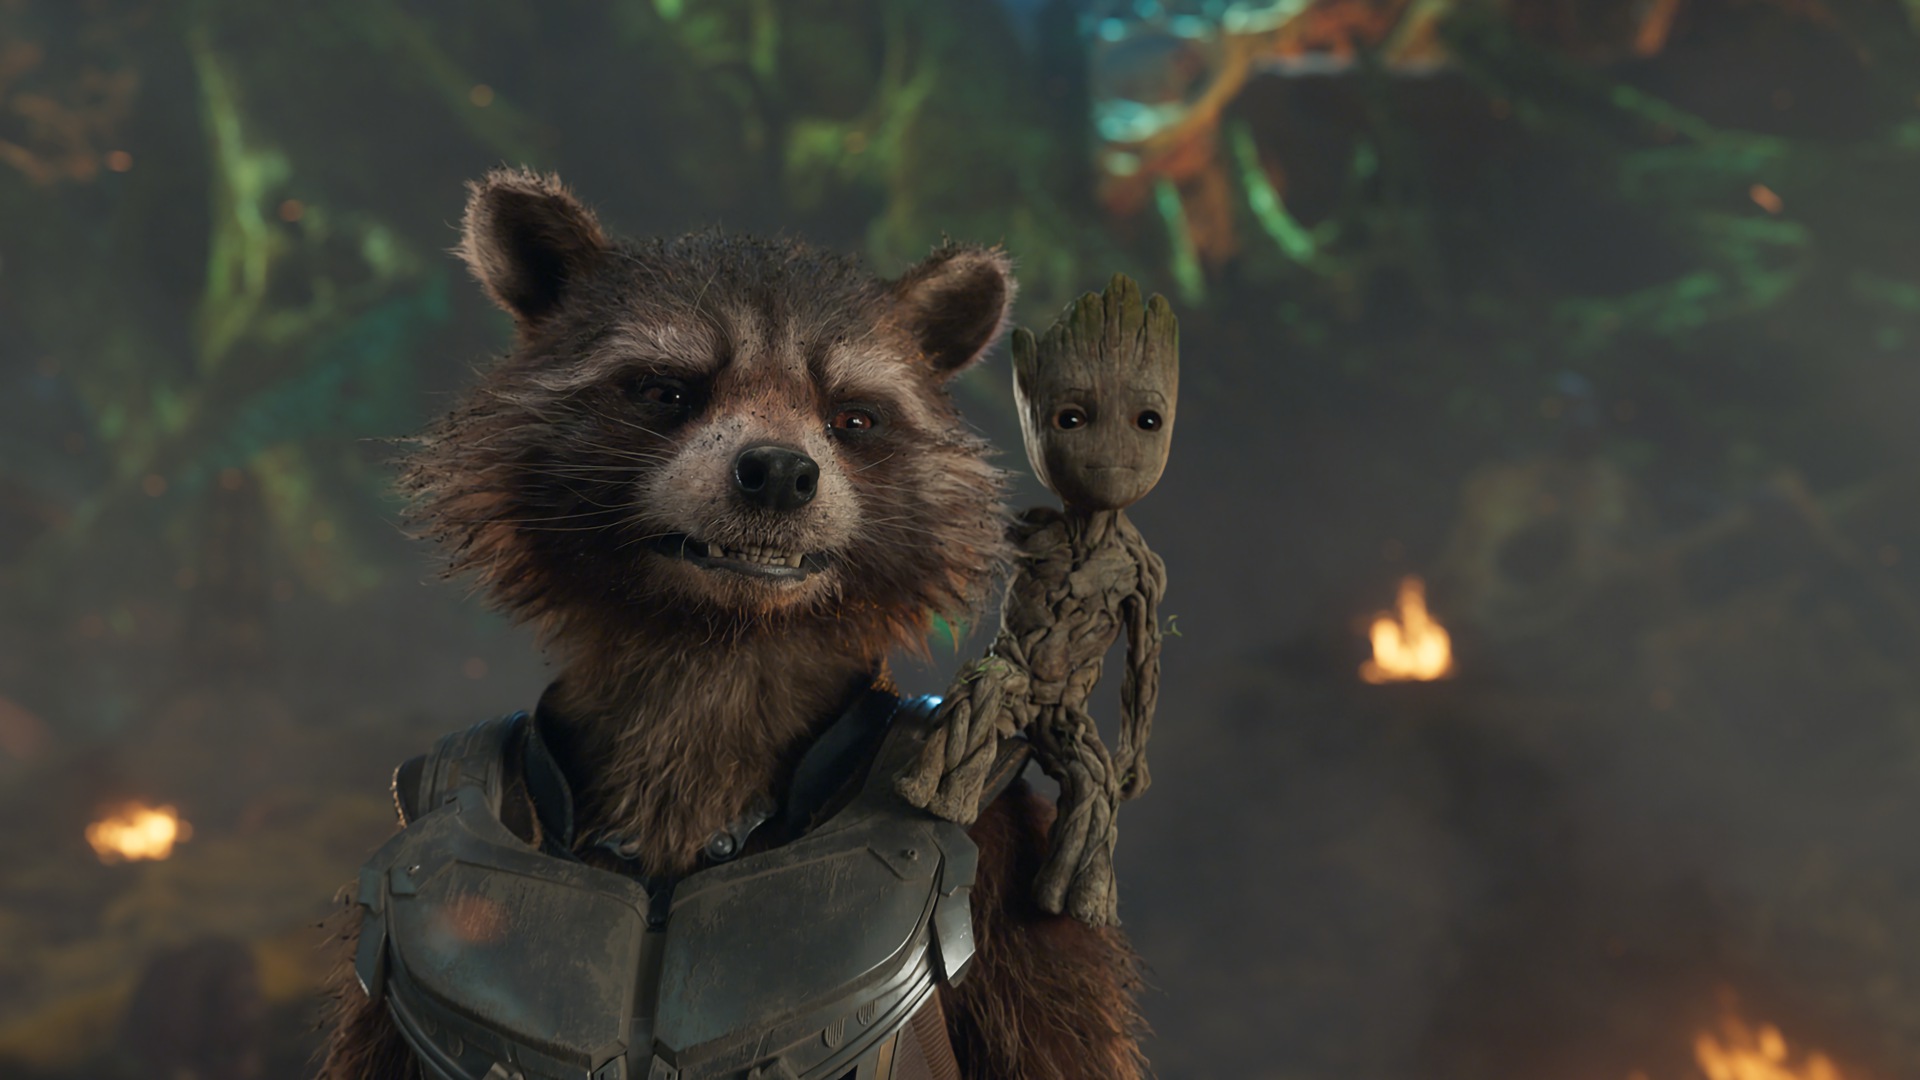 Baby Groot sits on Rocket the Raccoon's shoulder, both smiling.